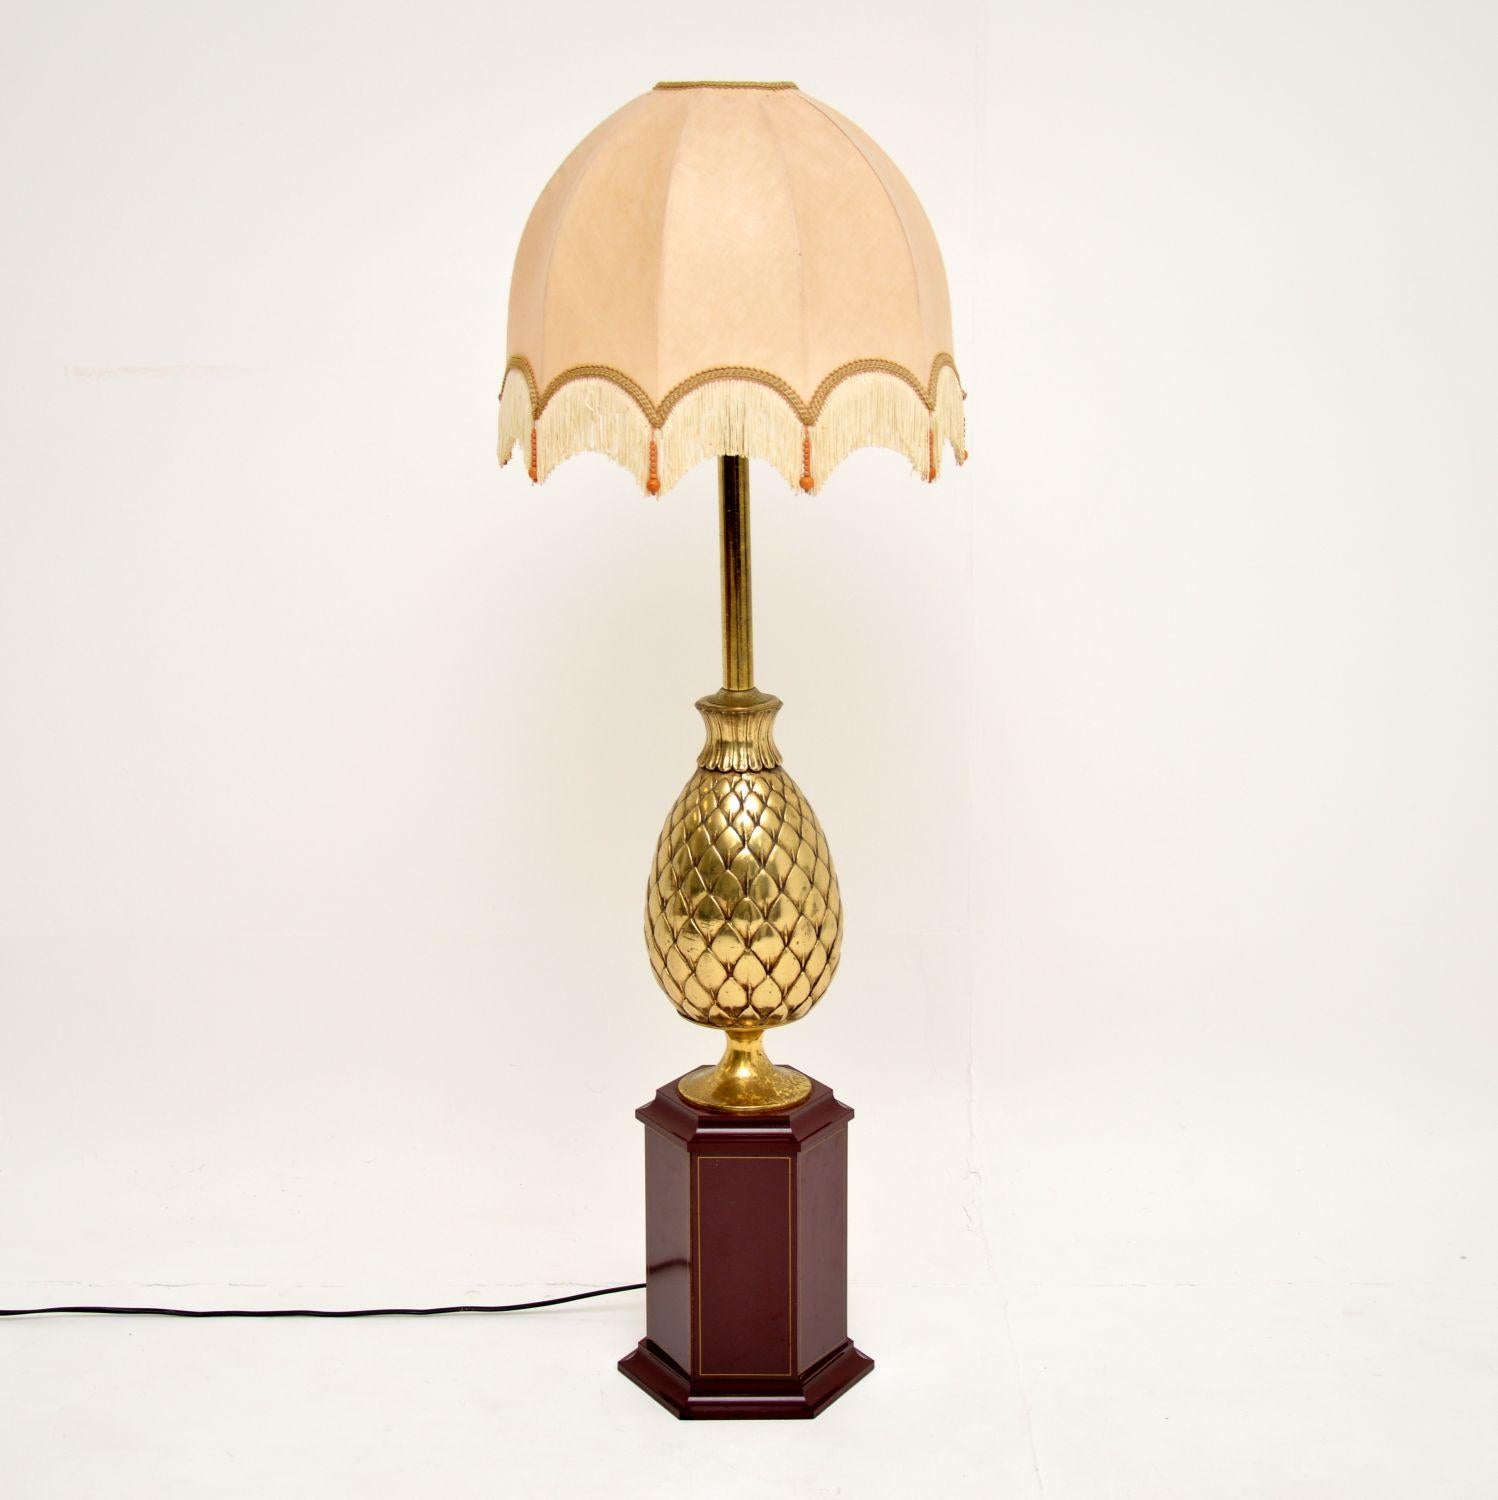 A stunning and very large vintage table lamp, this was made in France and dates from circa 1970s. It’s over one-meter-tall, so could be used as a table lamp or a floor lamp.

It has a beautiful pineapple shaped brass column, and sits on a lovely